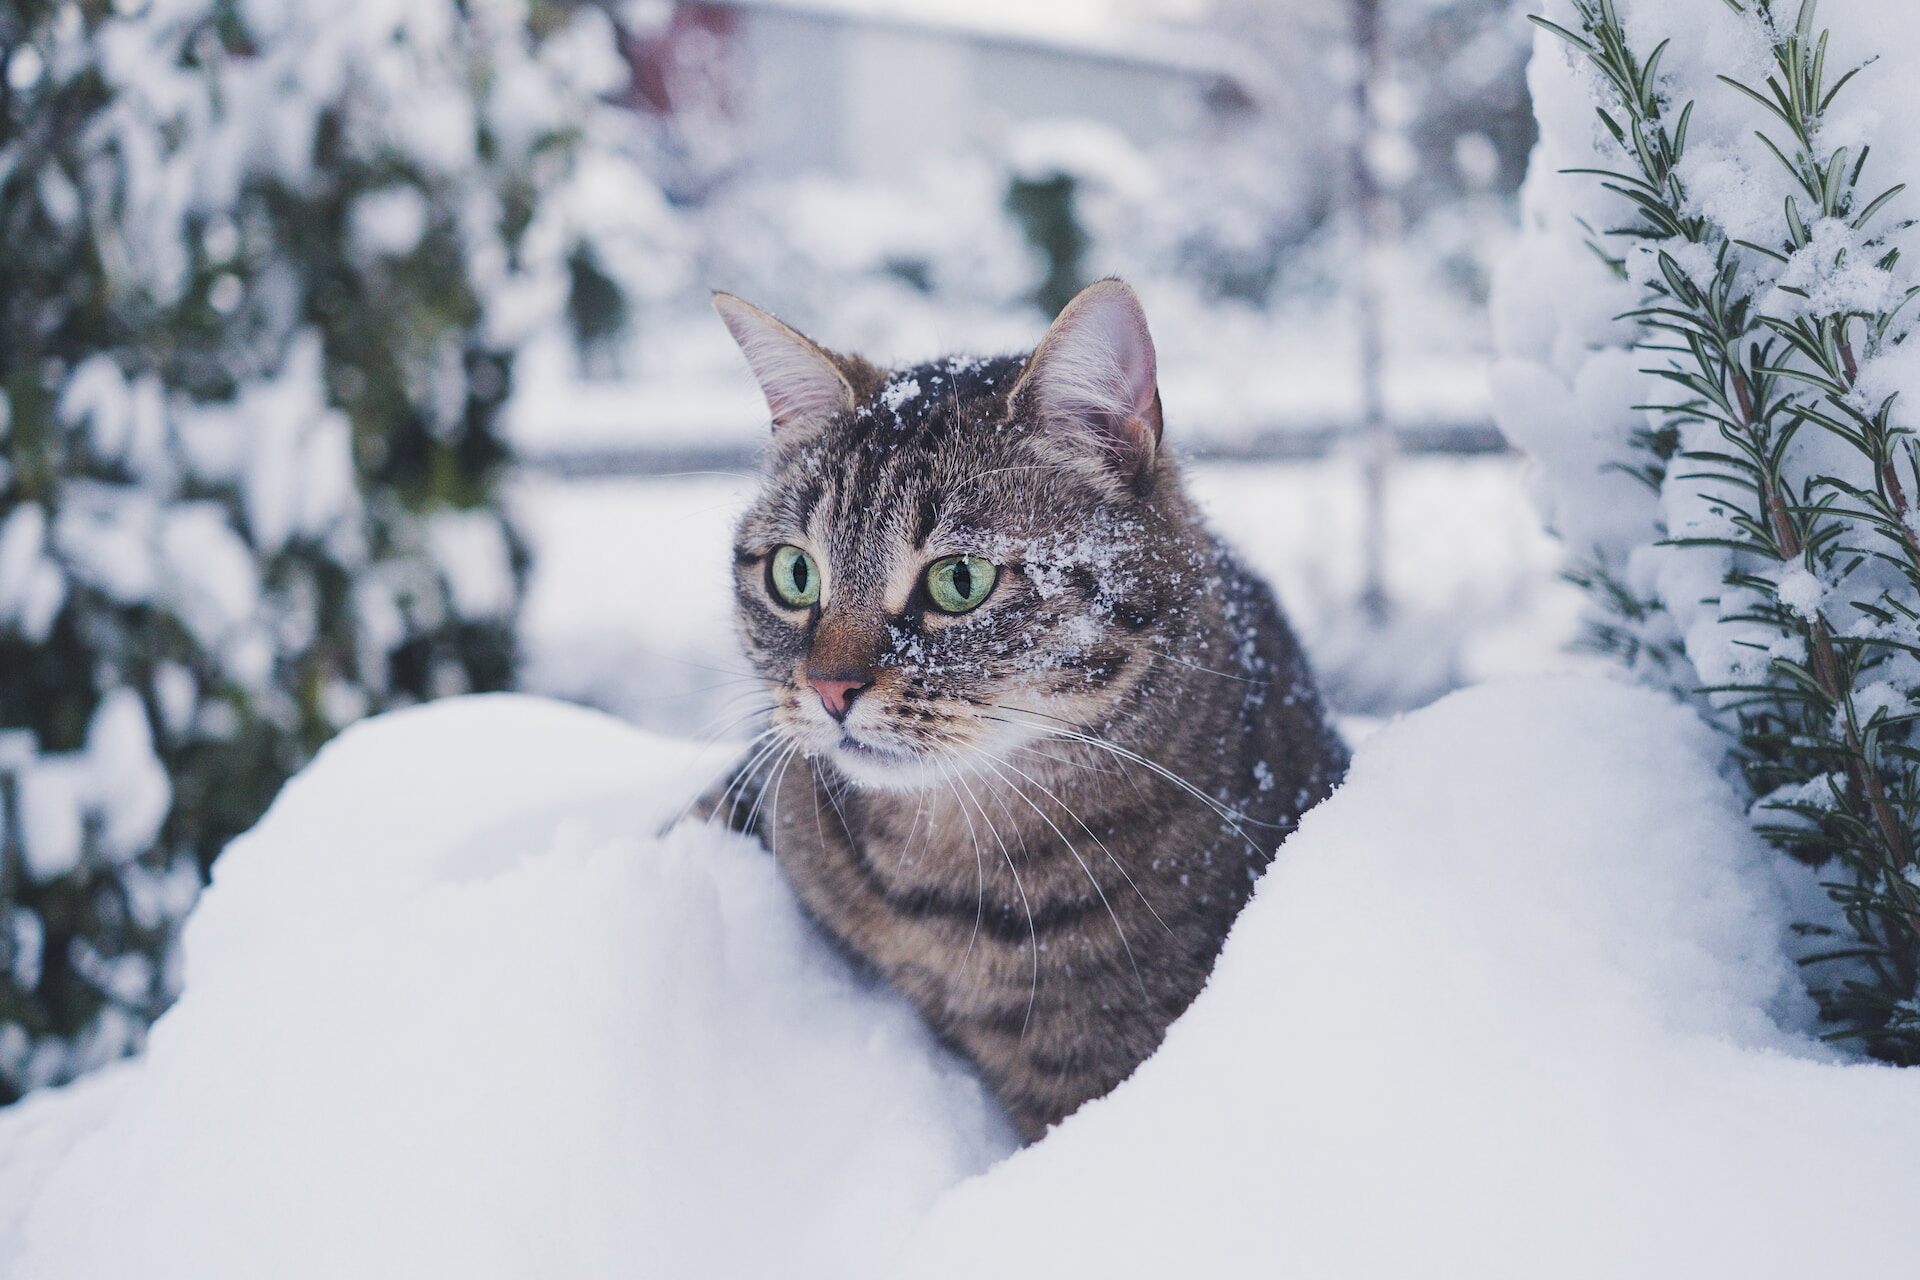 A cat exploring a snowy pile outdoors